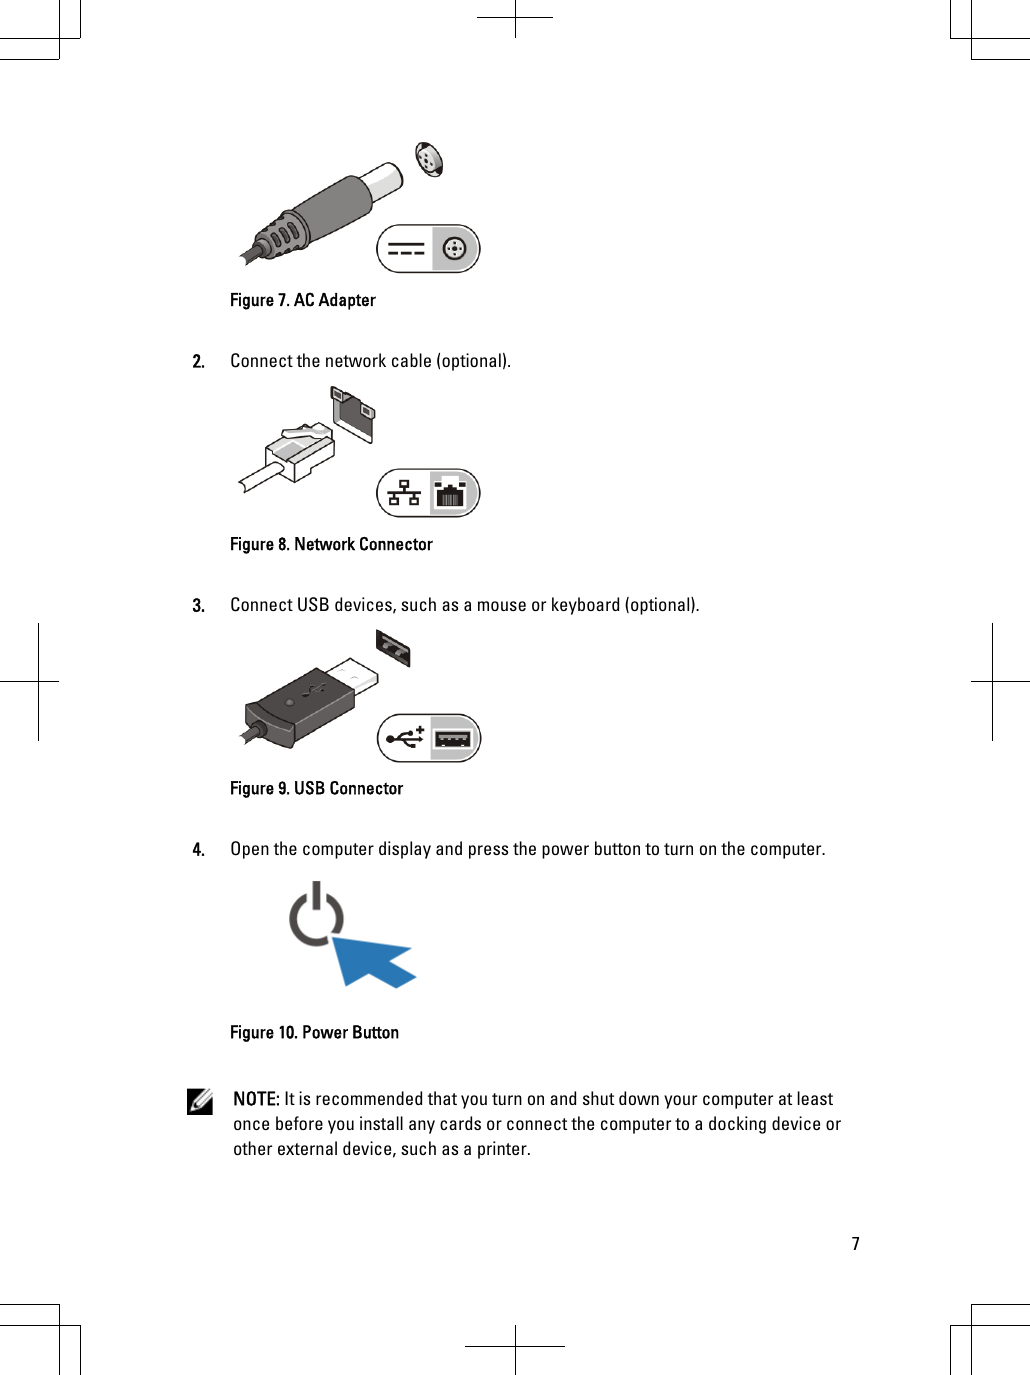 Figure 7. AC Adapter2. Connect the network cable (optional).Figure 8. Network Connector3. Connect USB devices, such as a mouse or keyboard (optional).Figure 9. USB Connector4. Open the computer display and press the power button to turn on the computer.Figure 10. Power ButtonNOTE: It is recommended that you turn on and shut down your computer at least once before you install any cards or connect the computer to a docking device or other external device, such as a printer.7